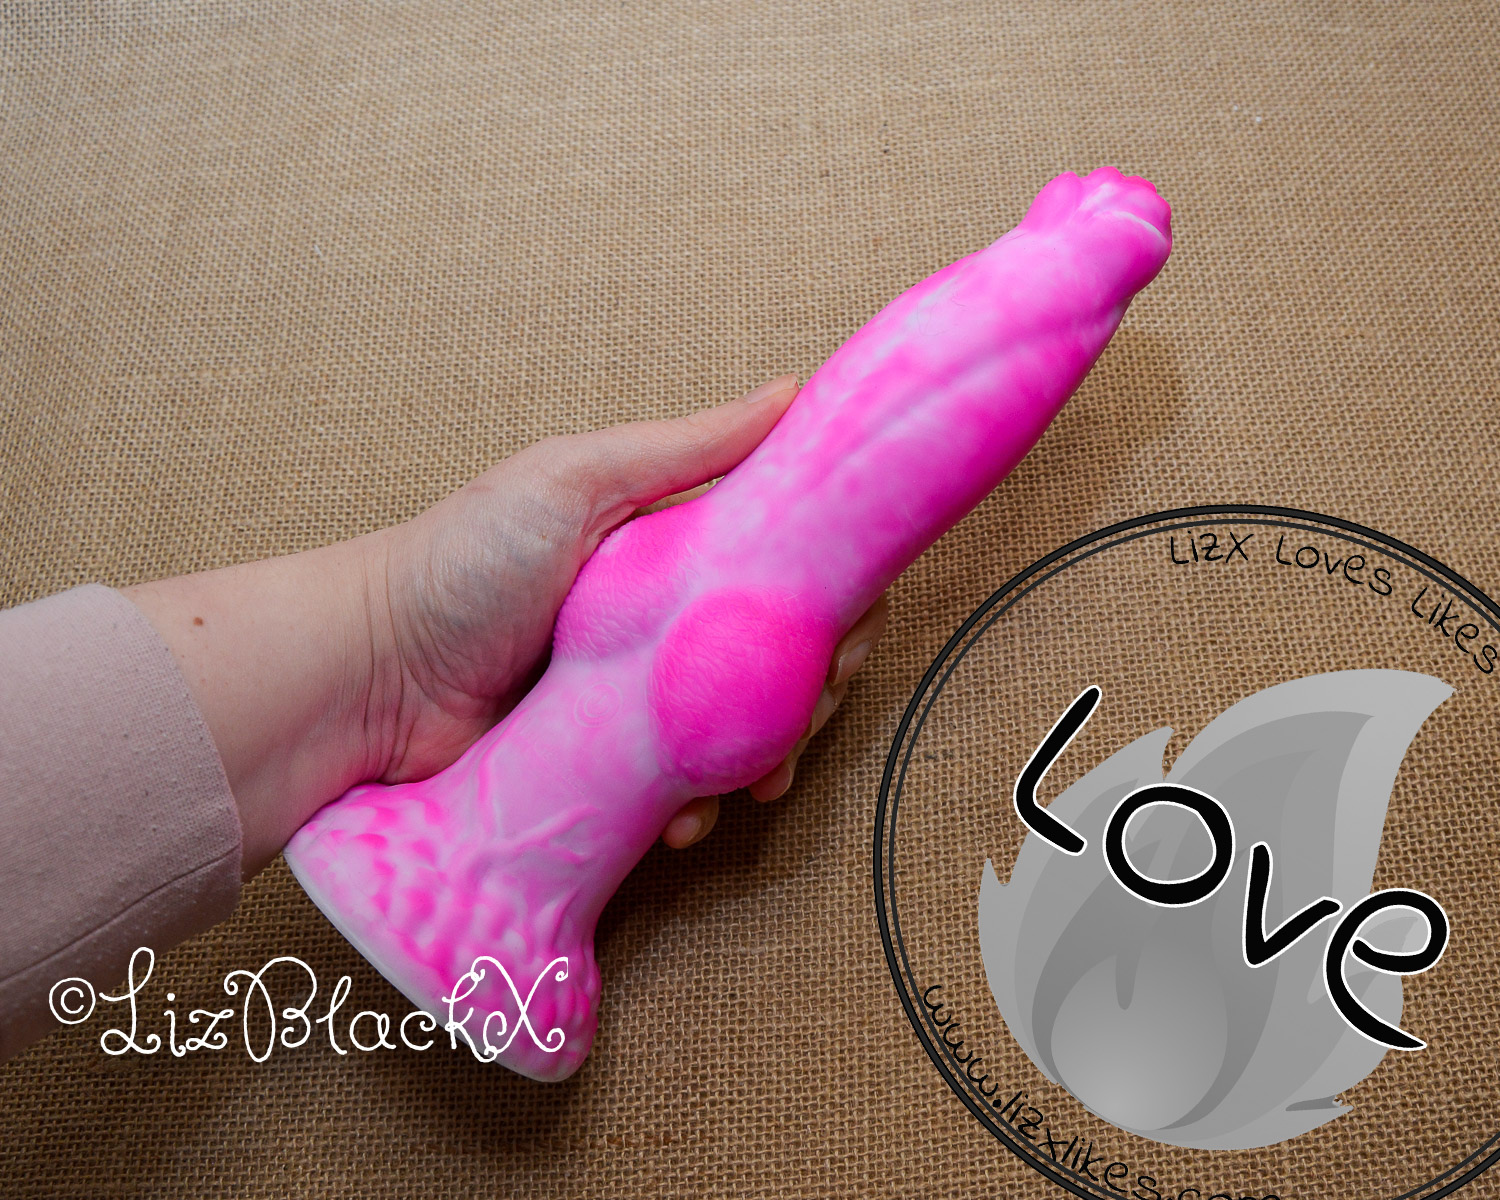 Review of the Dragon 8.8 Inch Thrusting Vibrating Fantasy Knot Dildo Big Shocked picture